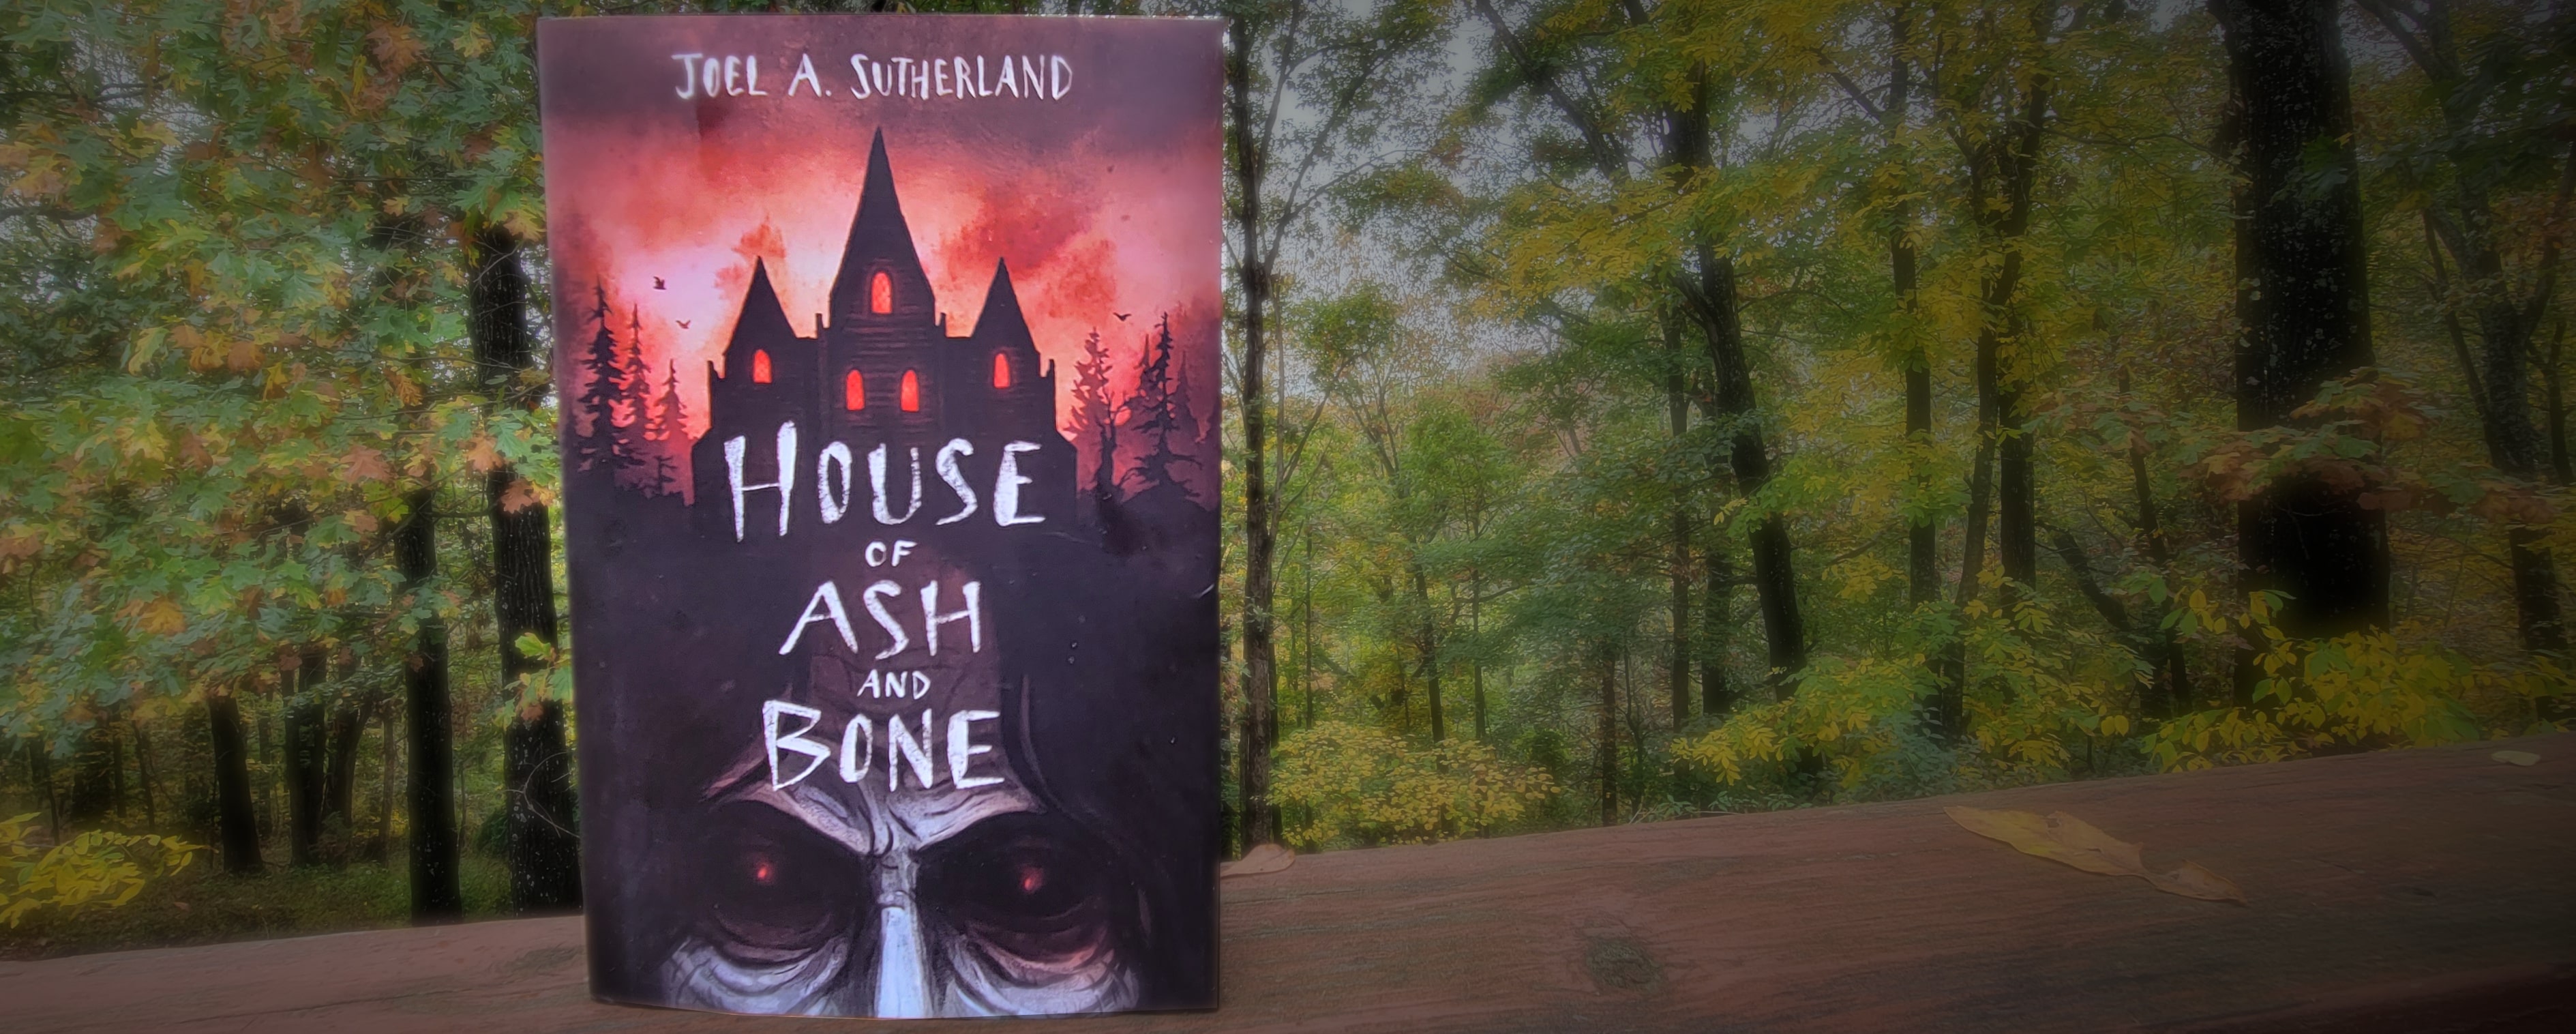 Book cover of House of Ash and Bone by Joel A. Sutherland